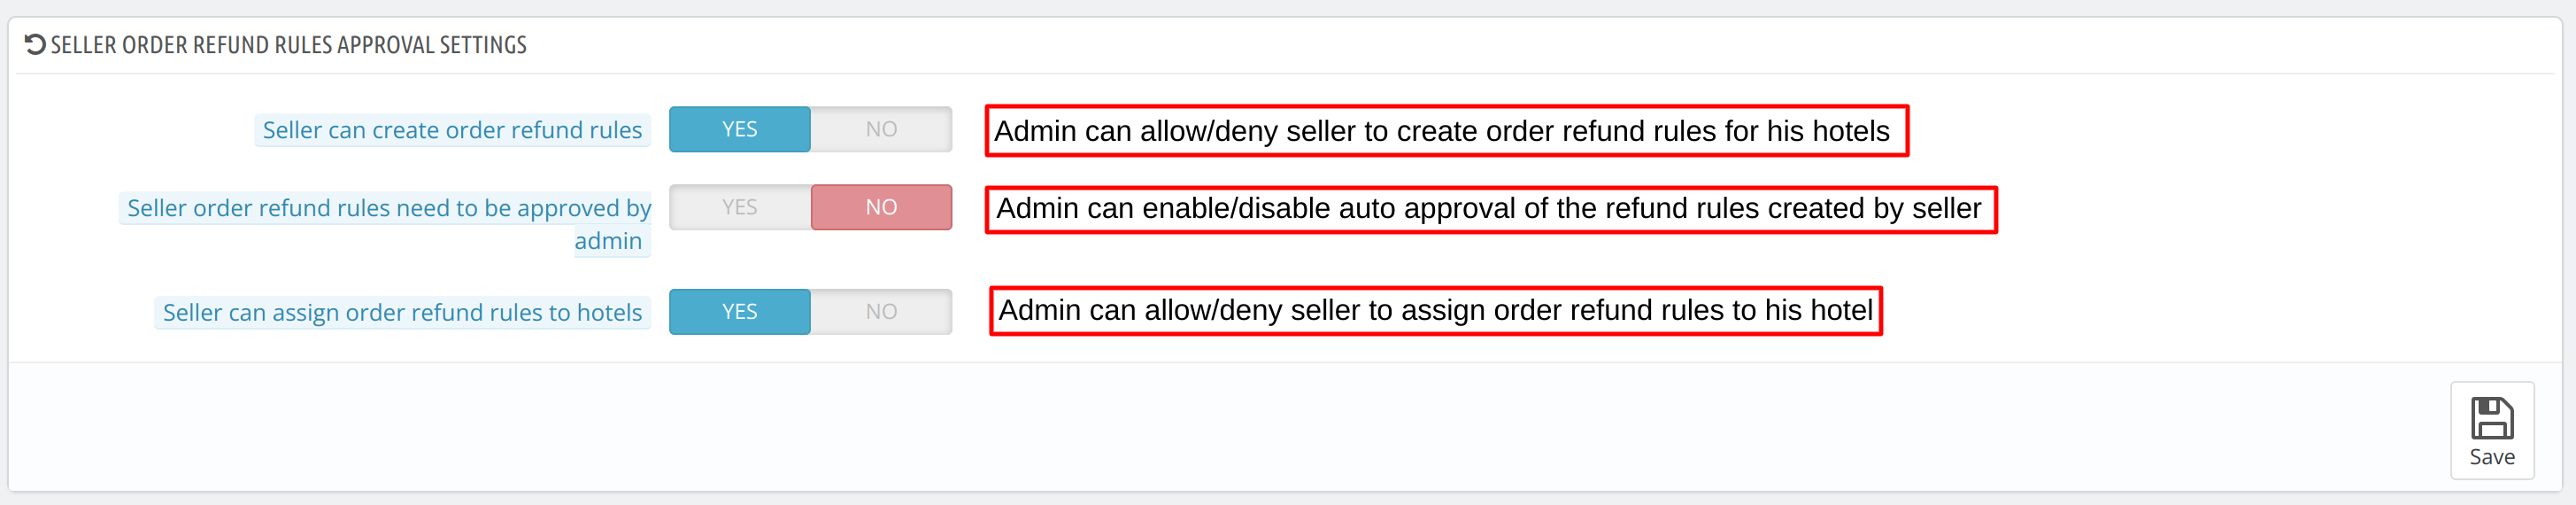 Seller Order Refund Rules Approval Settings